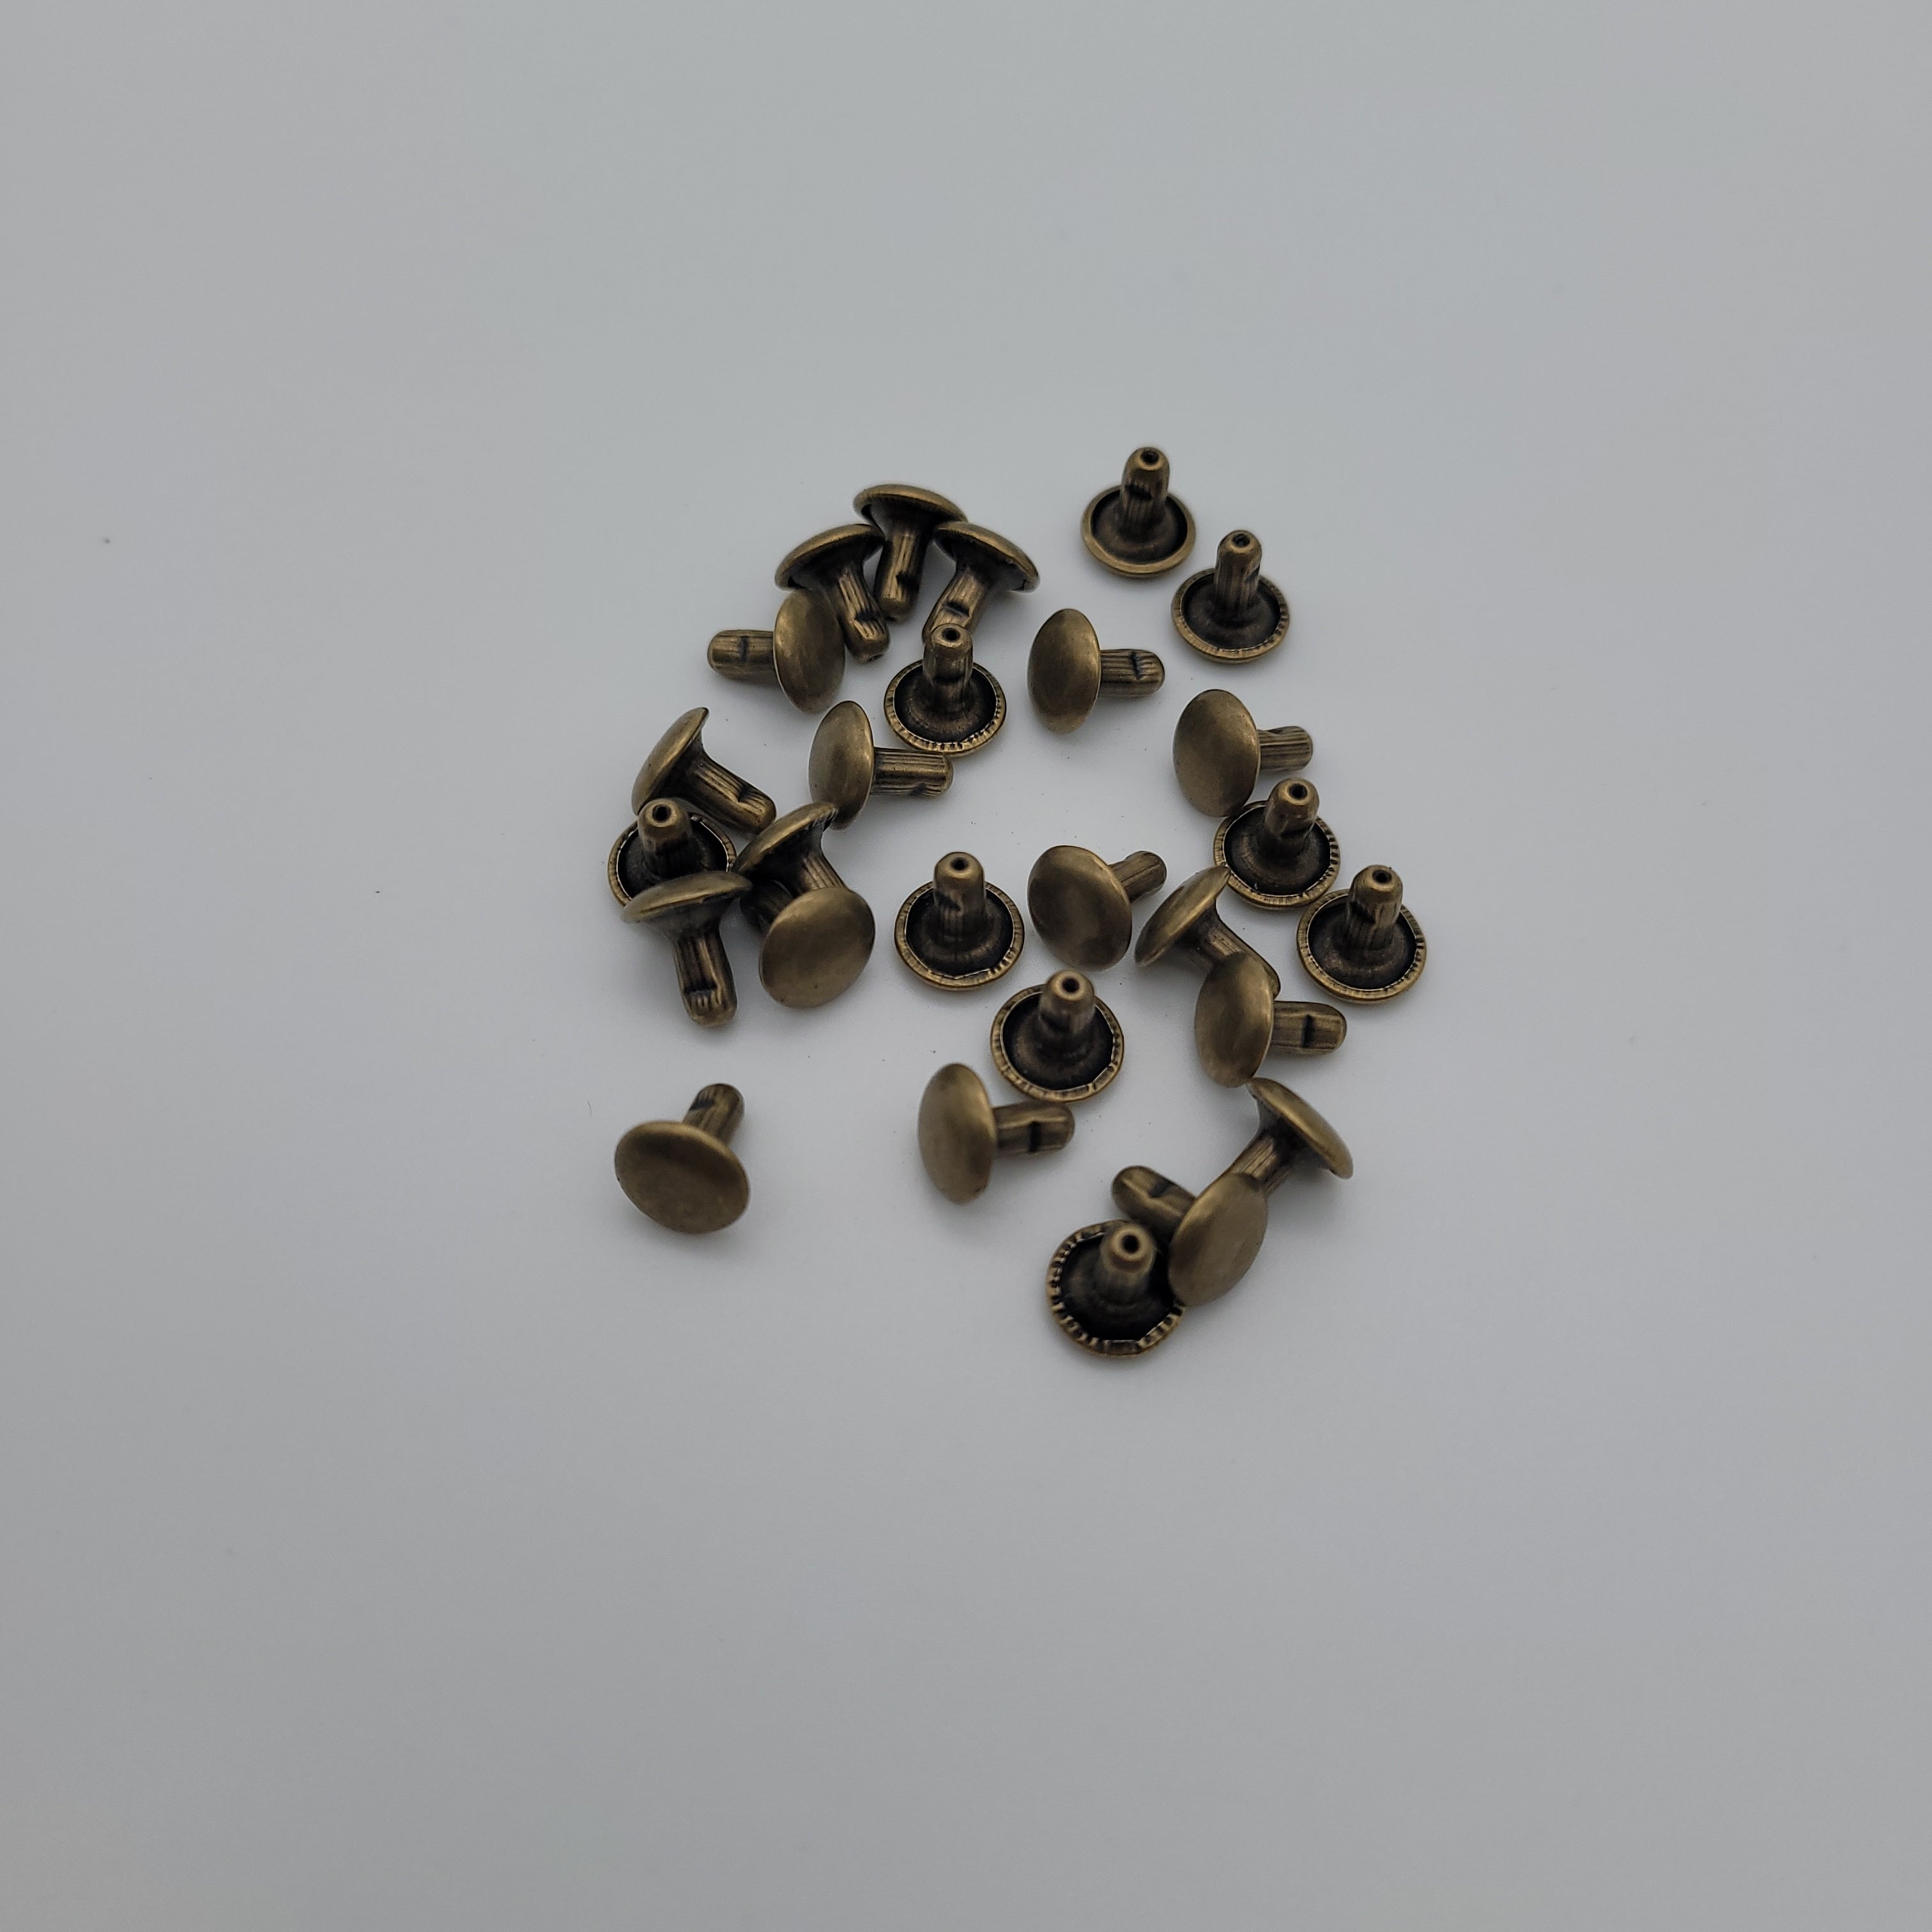 25 Pairs of Solid Brass Compression Rivets